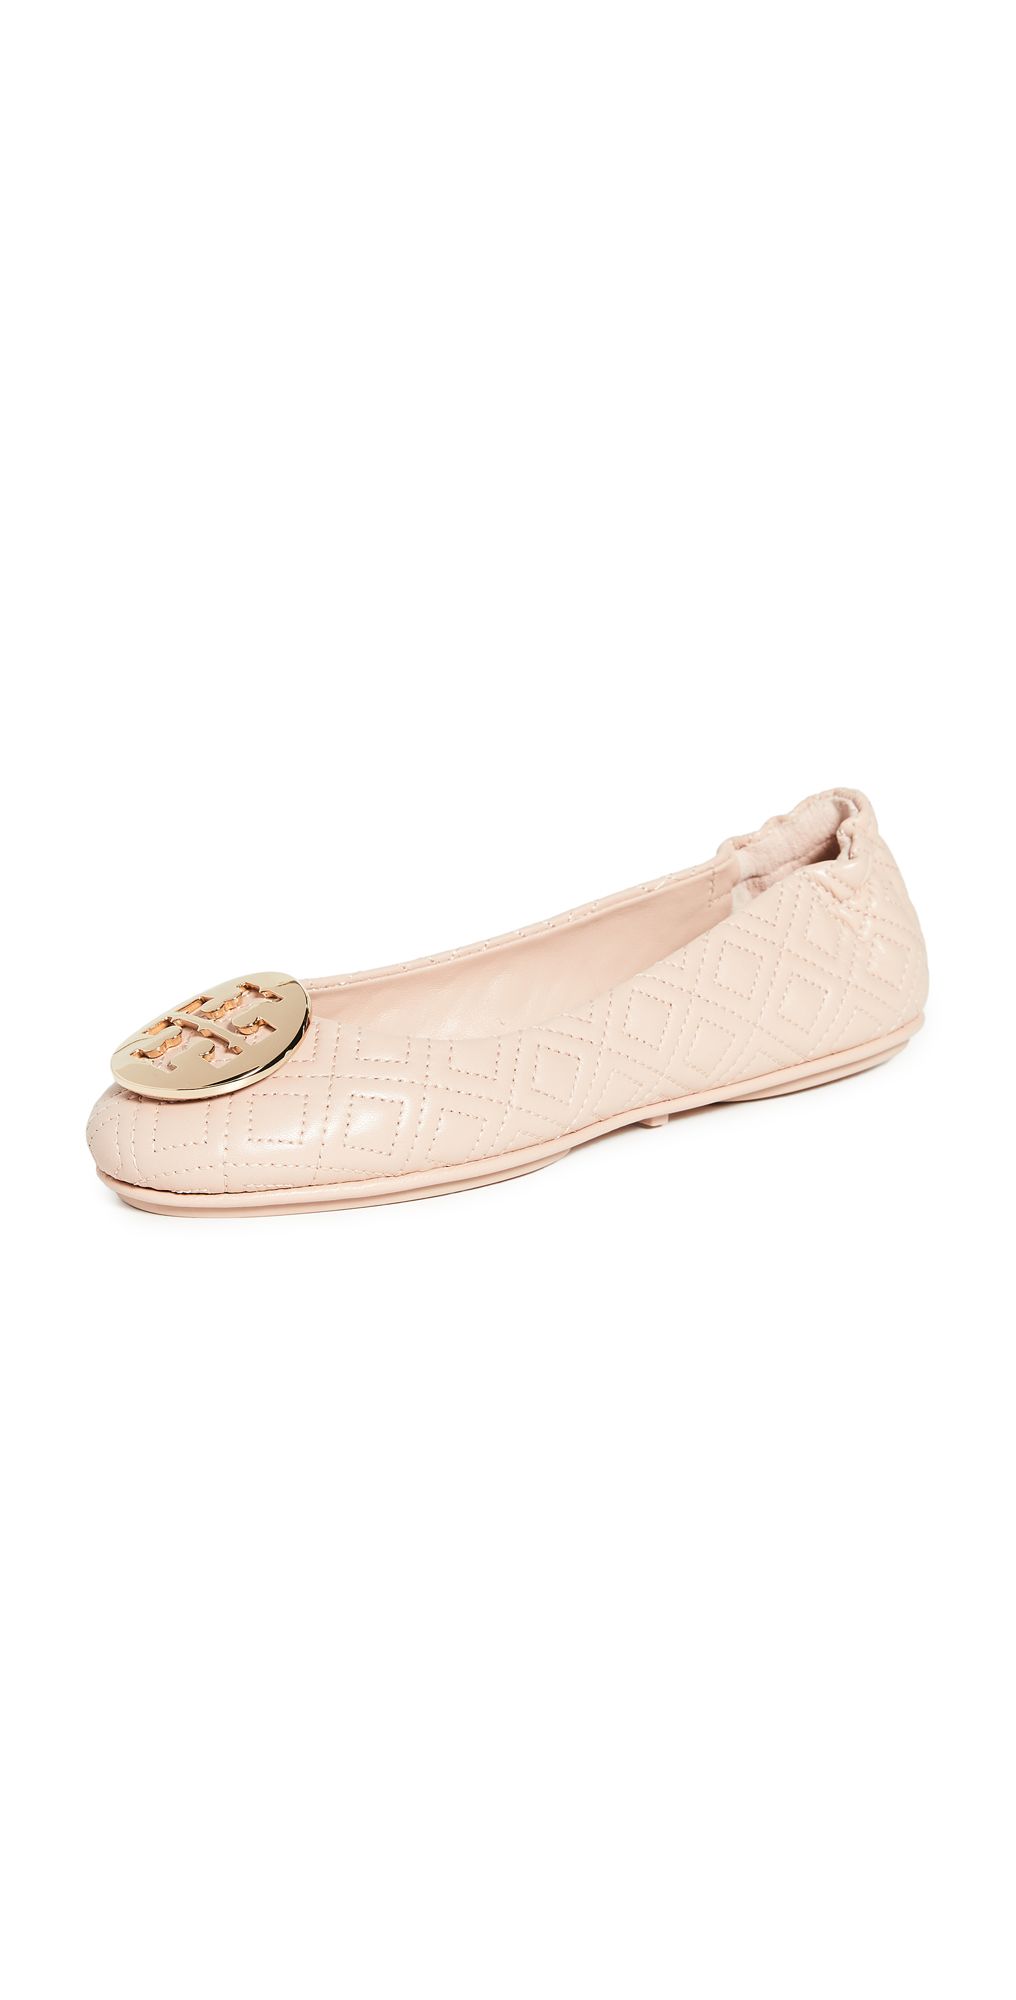 Tory Burch Quilted Minnie Flats | Shopbop